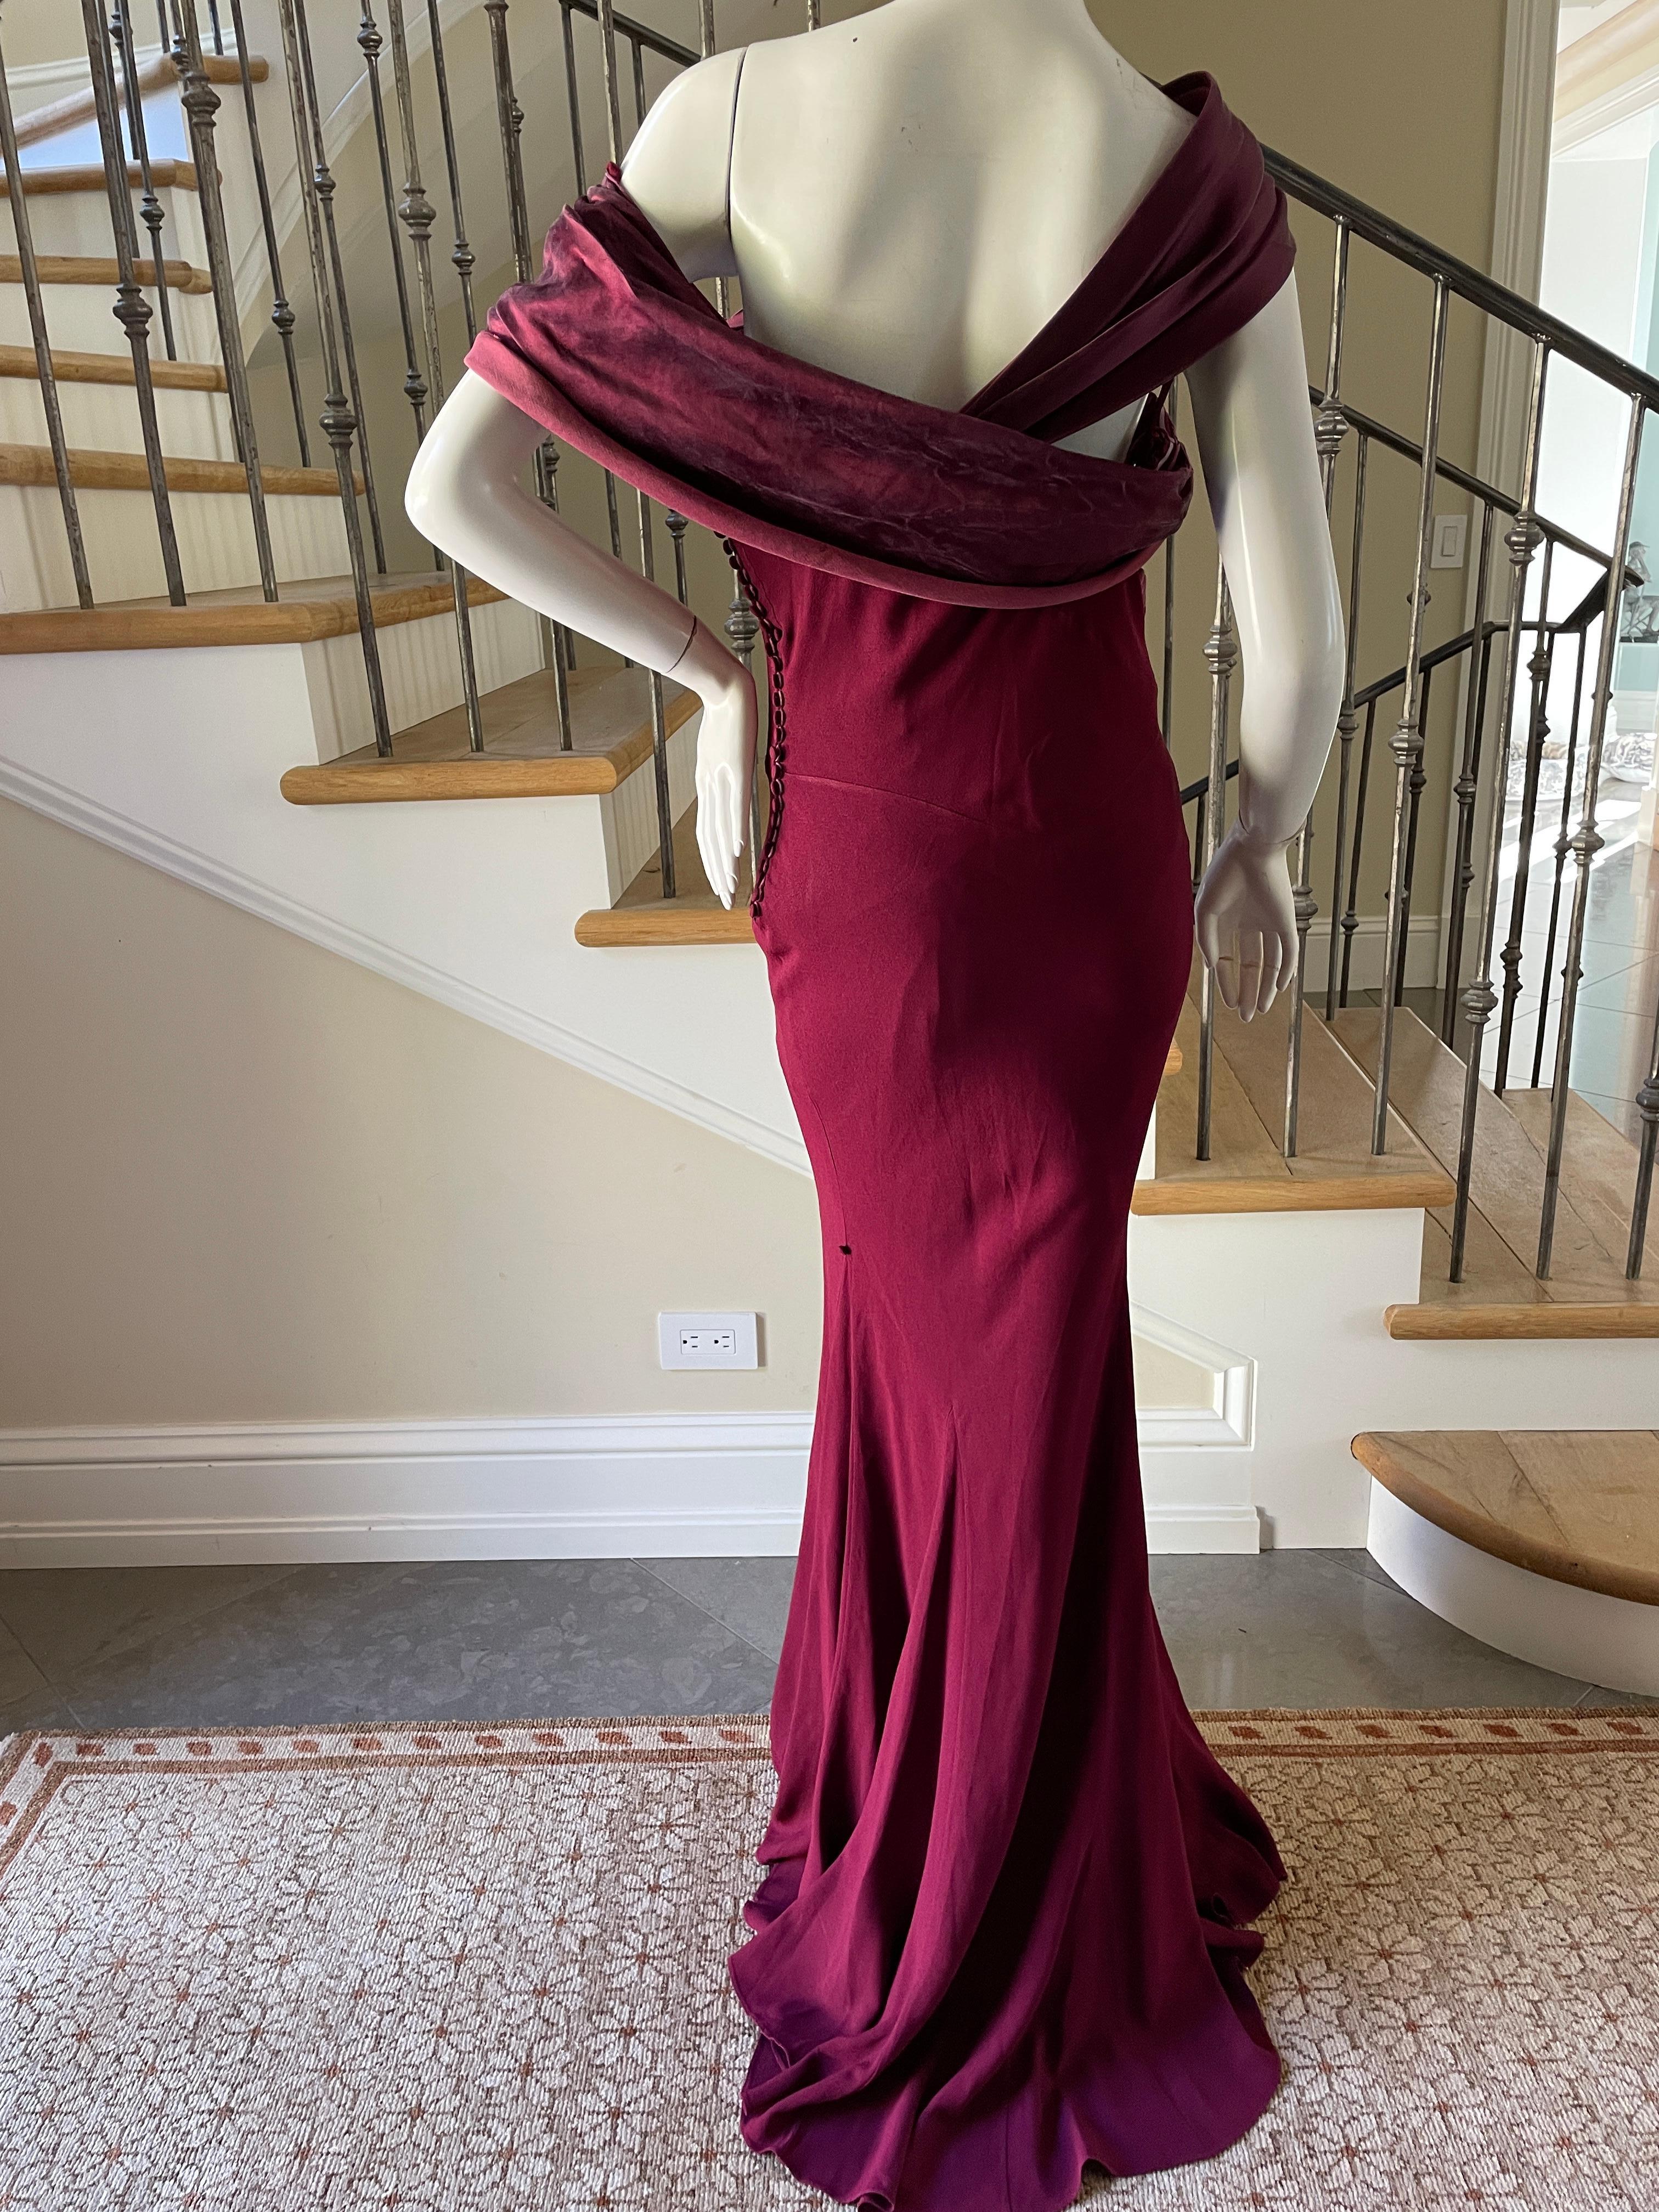 Christian Dior by John Galliano Burgundy Red Draped Evening Dress For Sale 6